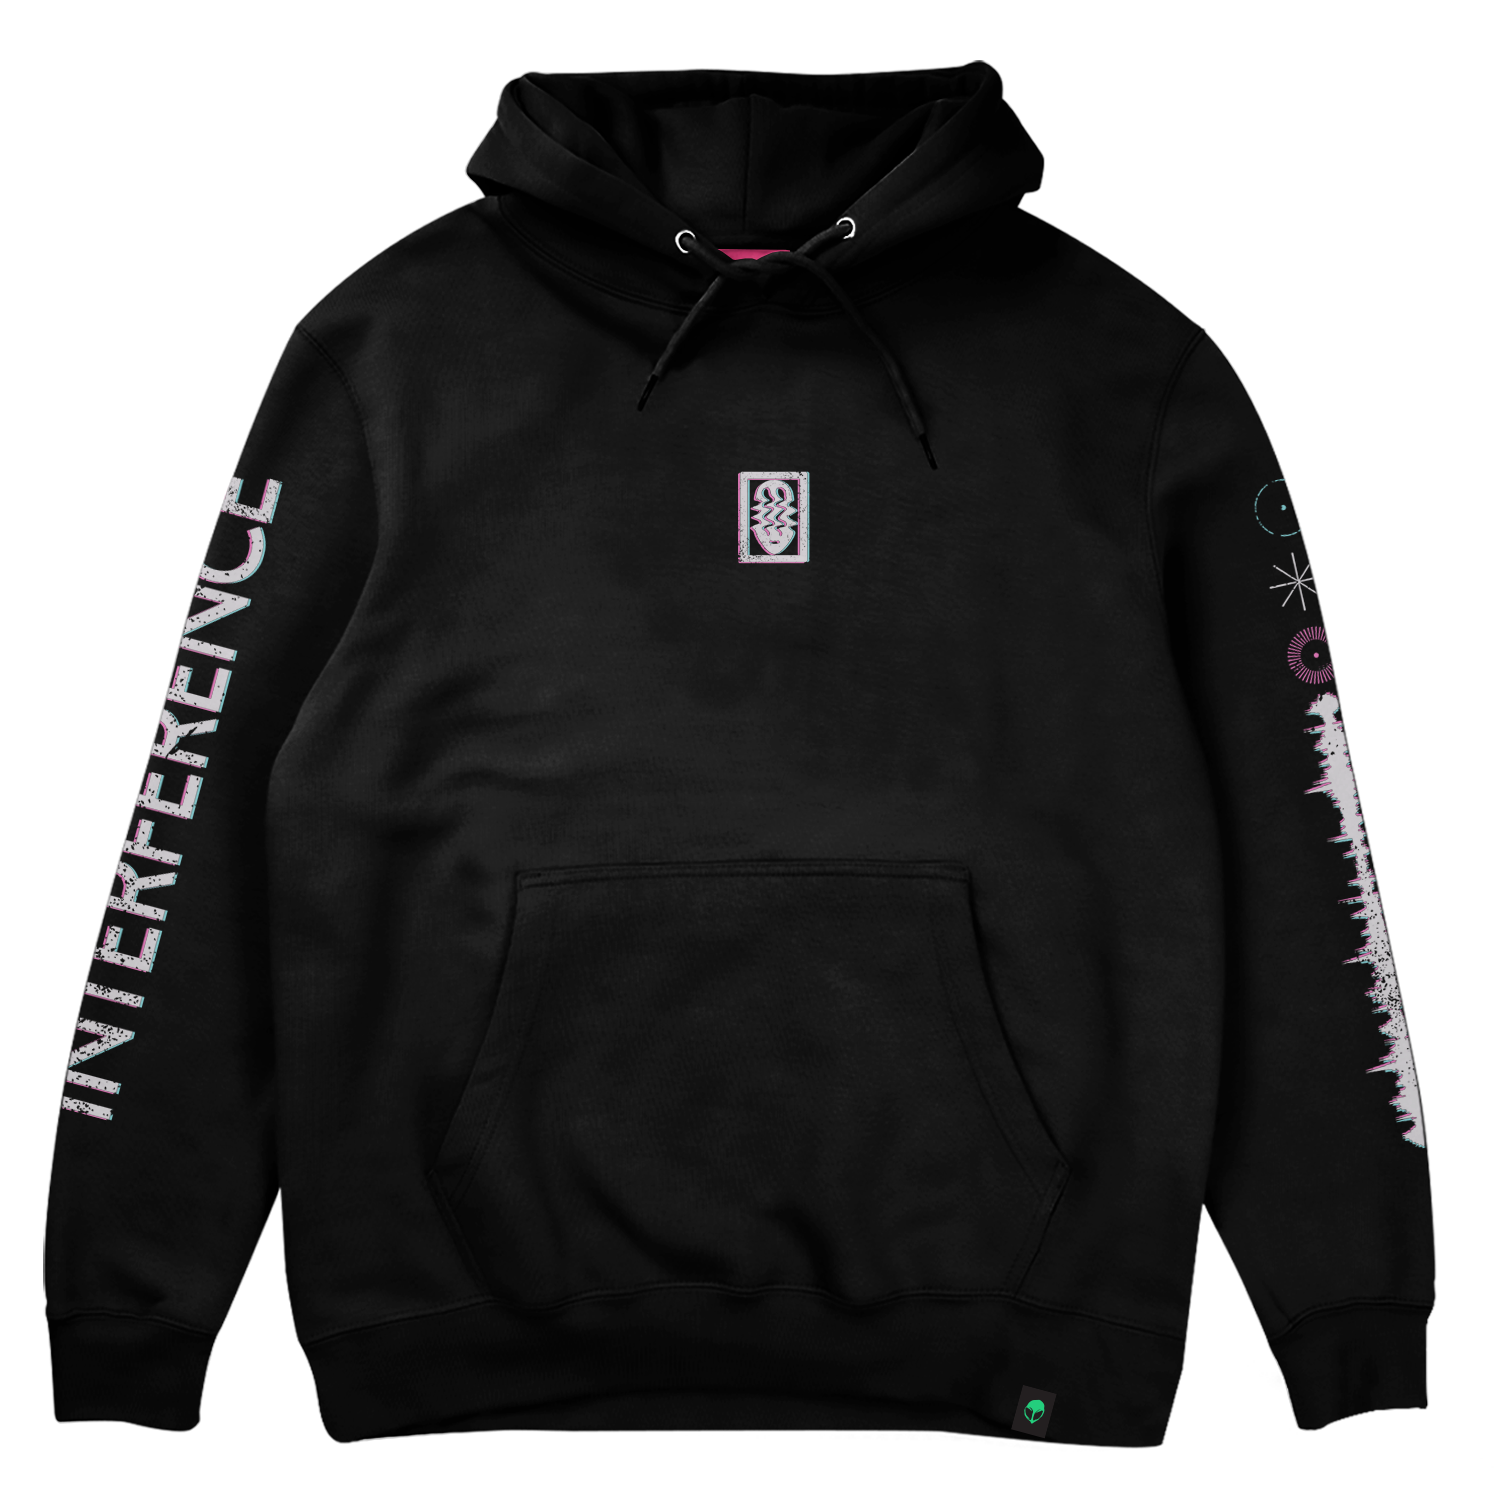 Ayylien Interference Hoodie